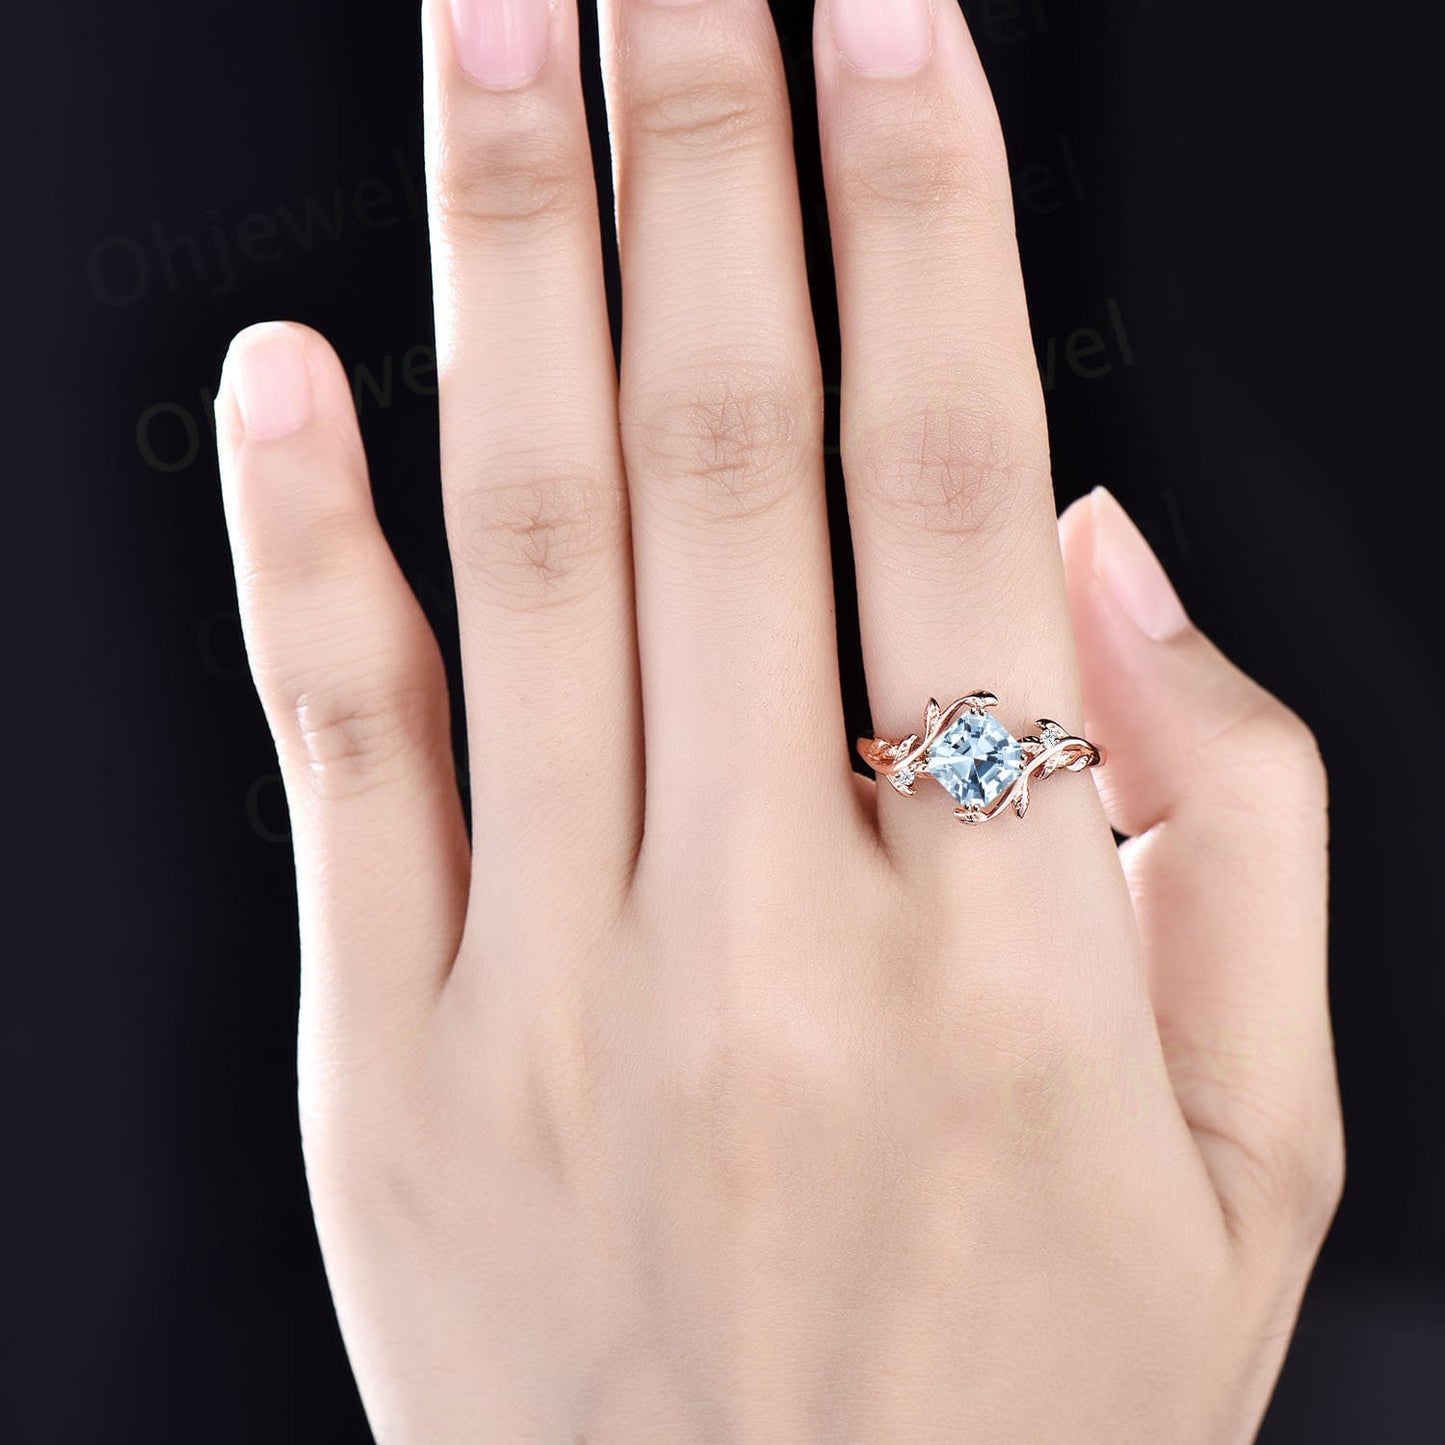 Vintaeg Asscher natural Aquamarine engagement ring women three stone sapphire ring leaf branch rose gold ring unique promise bridal ring